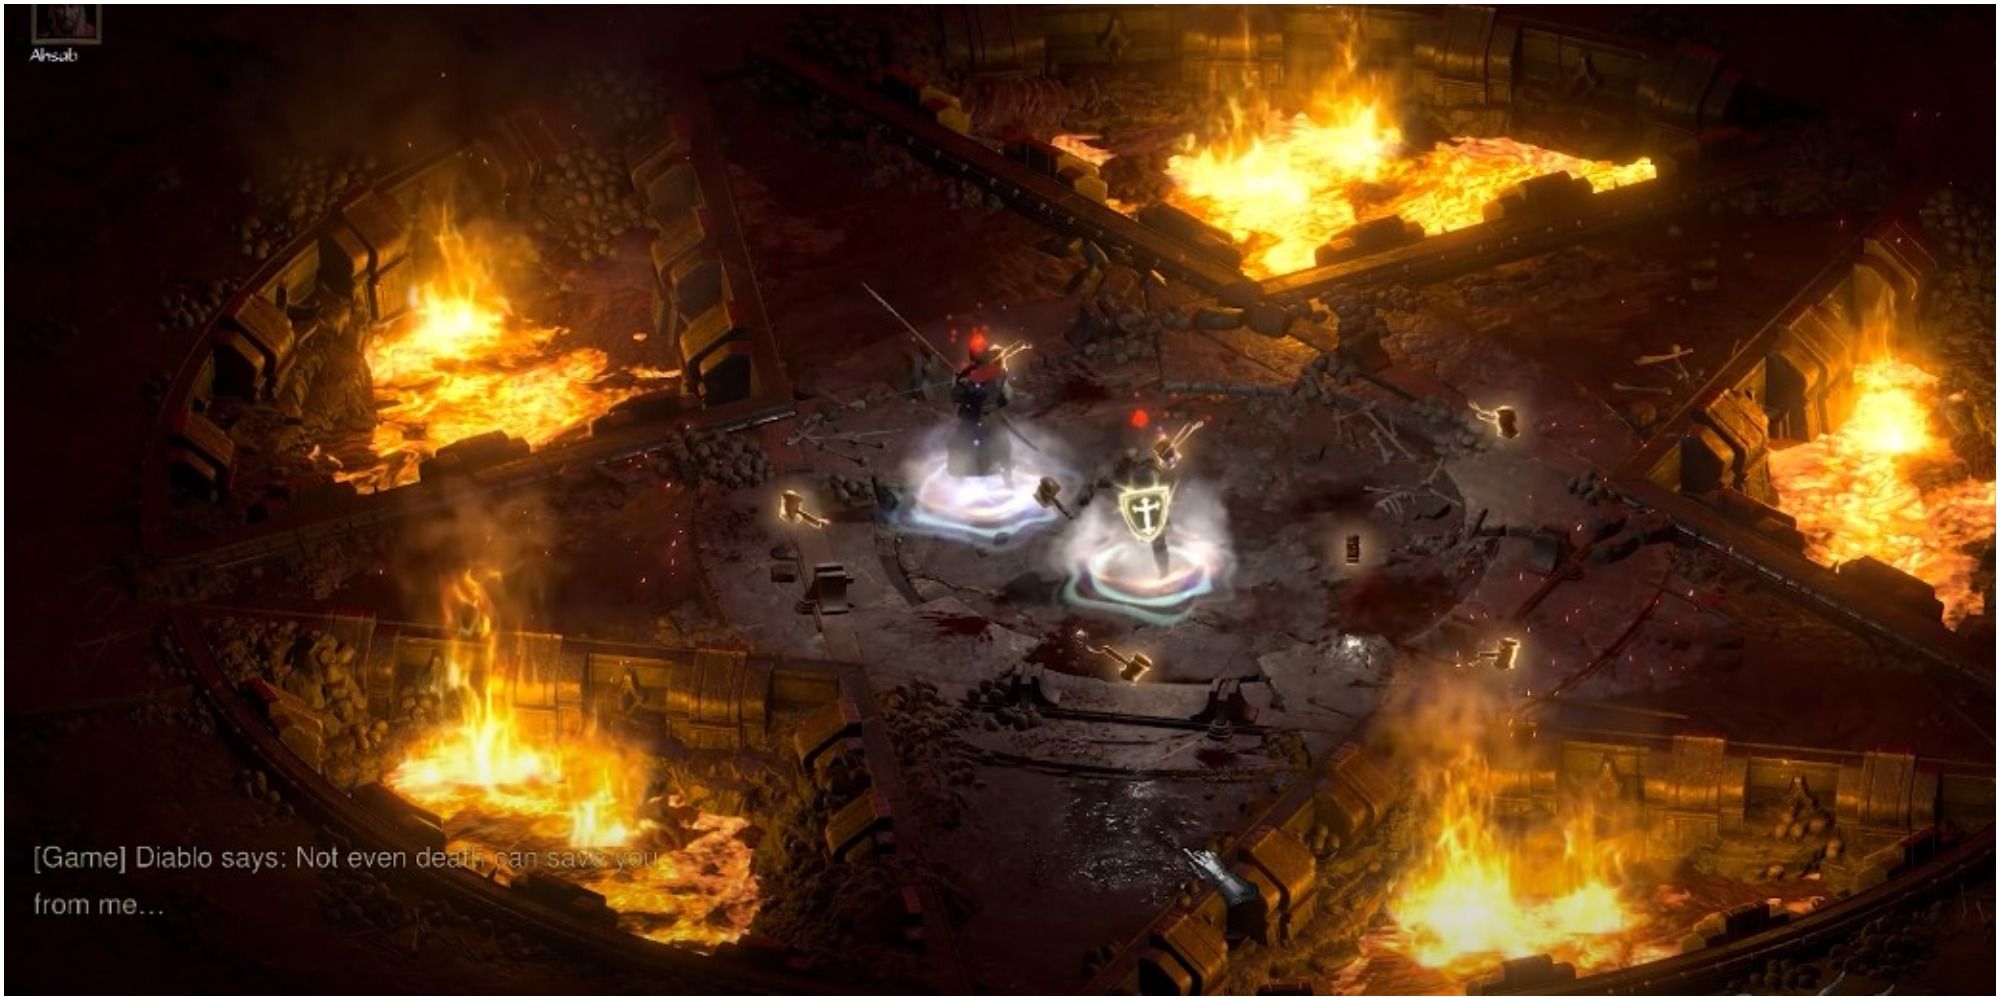 what is 4 socket shield worth in diablo 2 current ladder